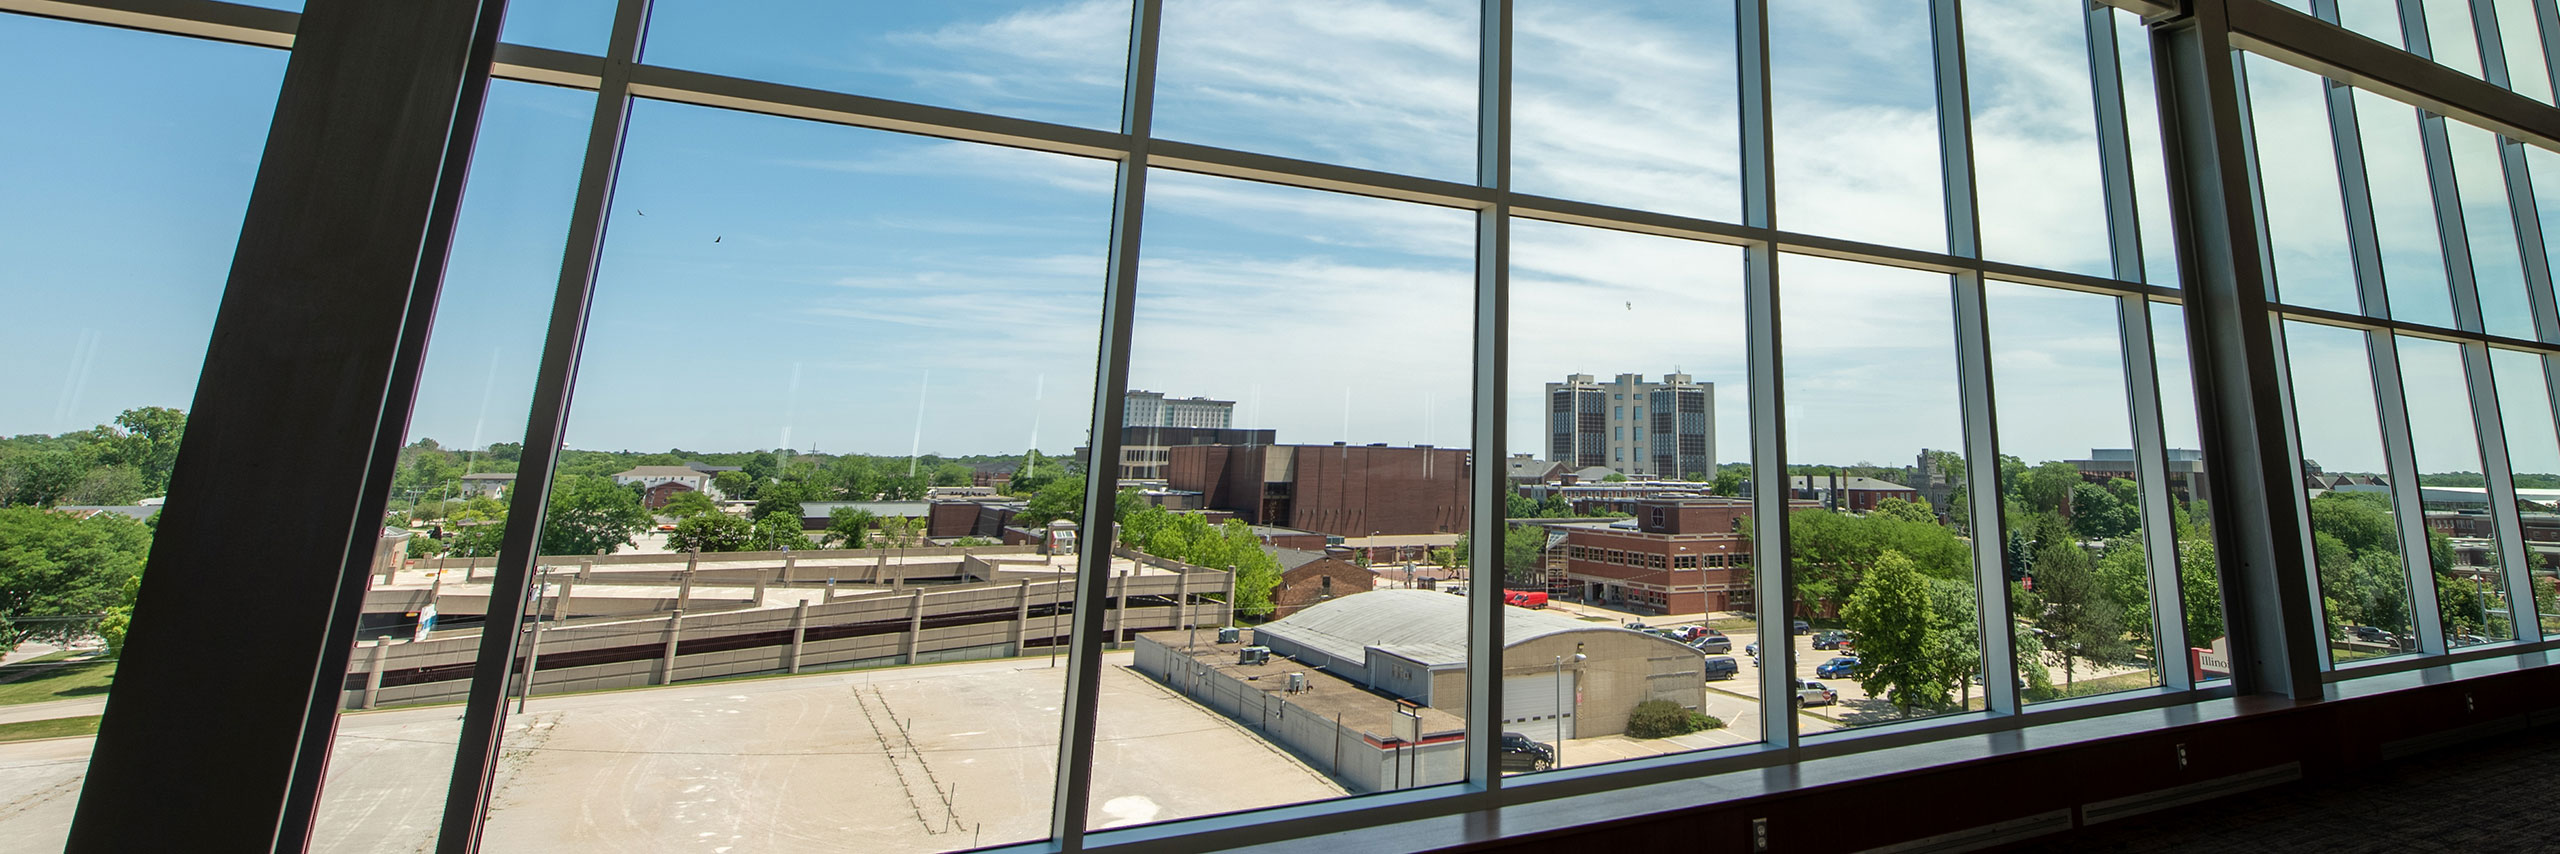 A window view of the campus environment.